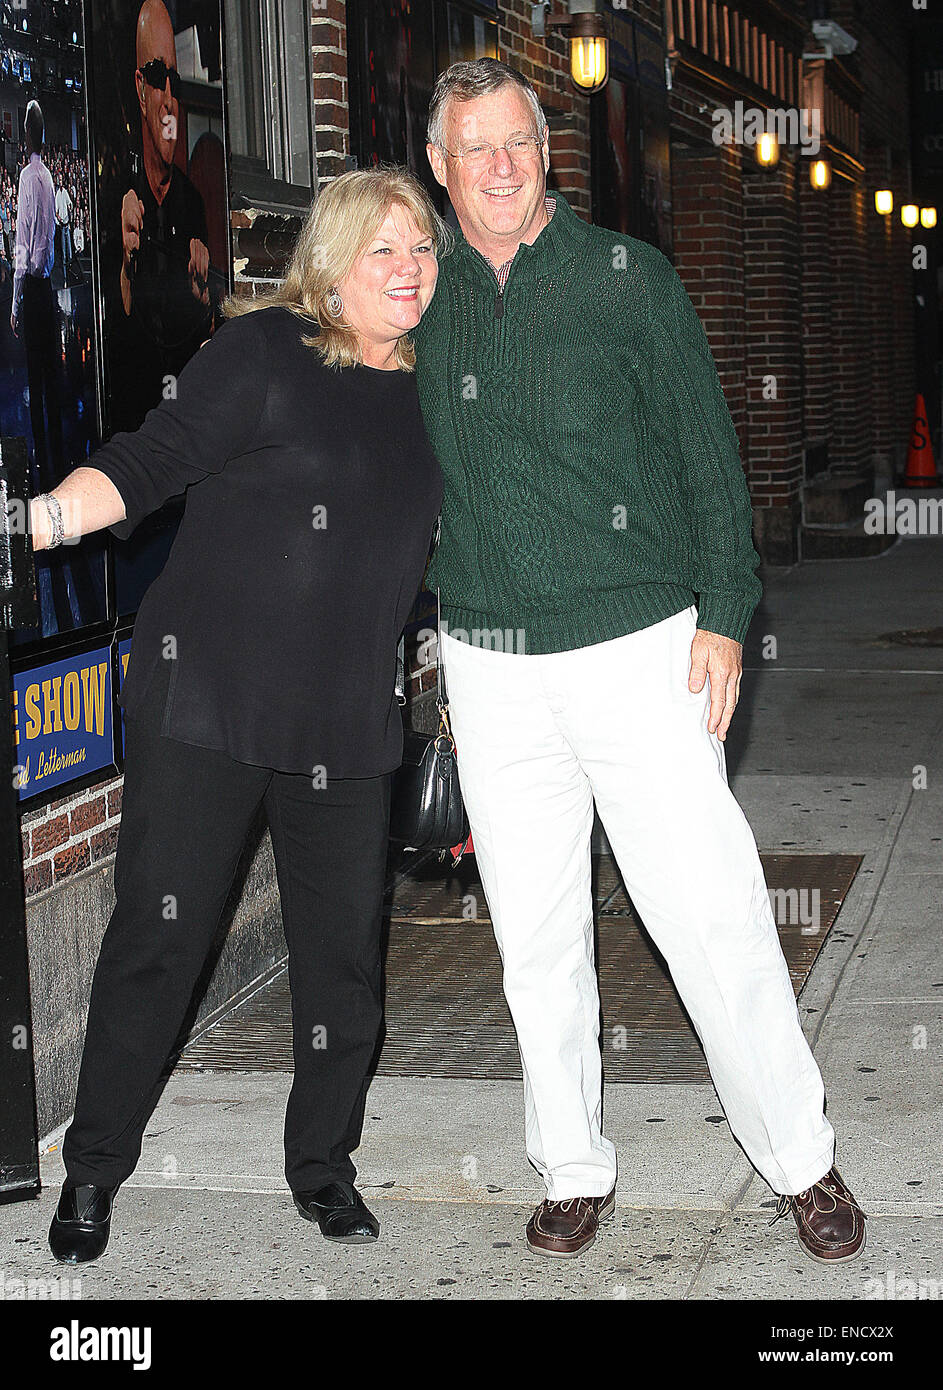 Taylor Swift S Parents Andrea Swift And Scott Swift At The Studios For Late Night Television Talk Show Late Show With David Letterman Featuring Andrea Finlay Scott Kingsley Swift Where New York City New